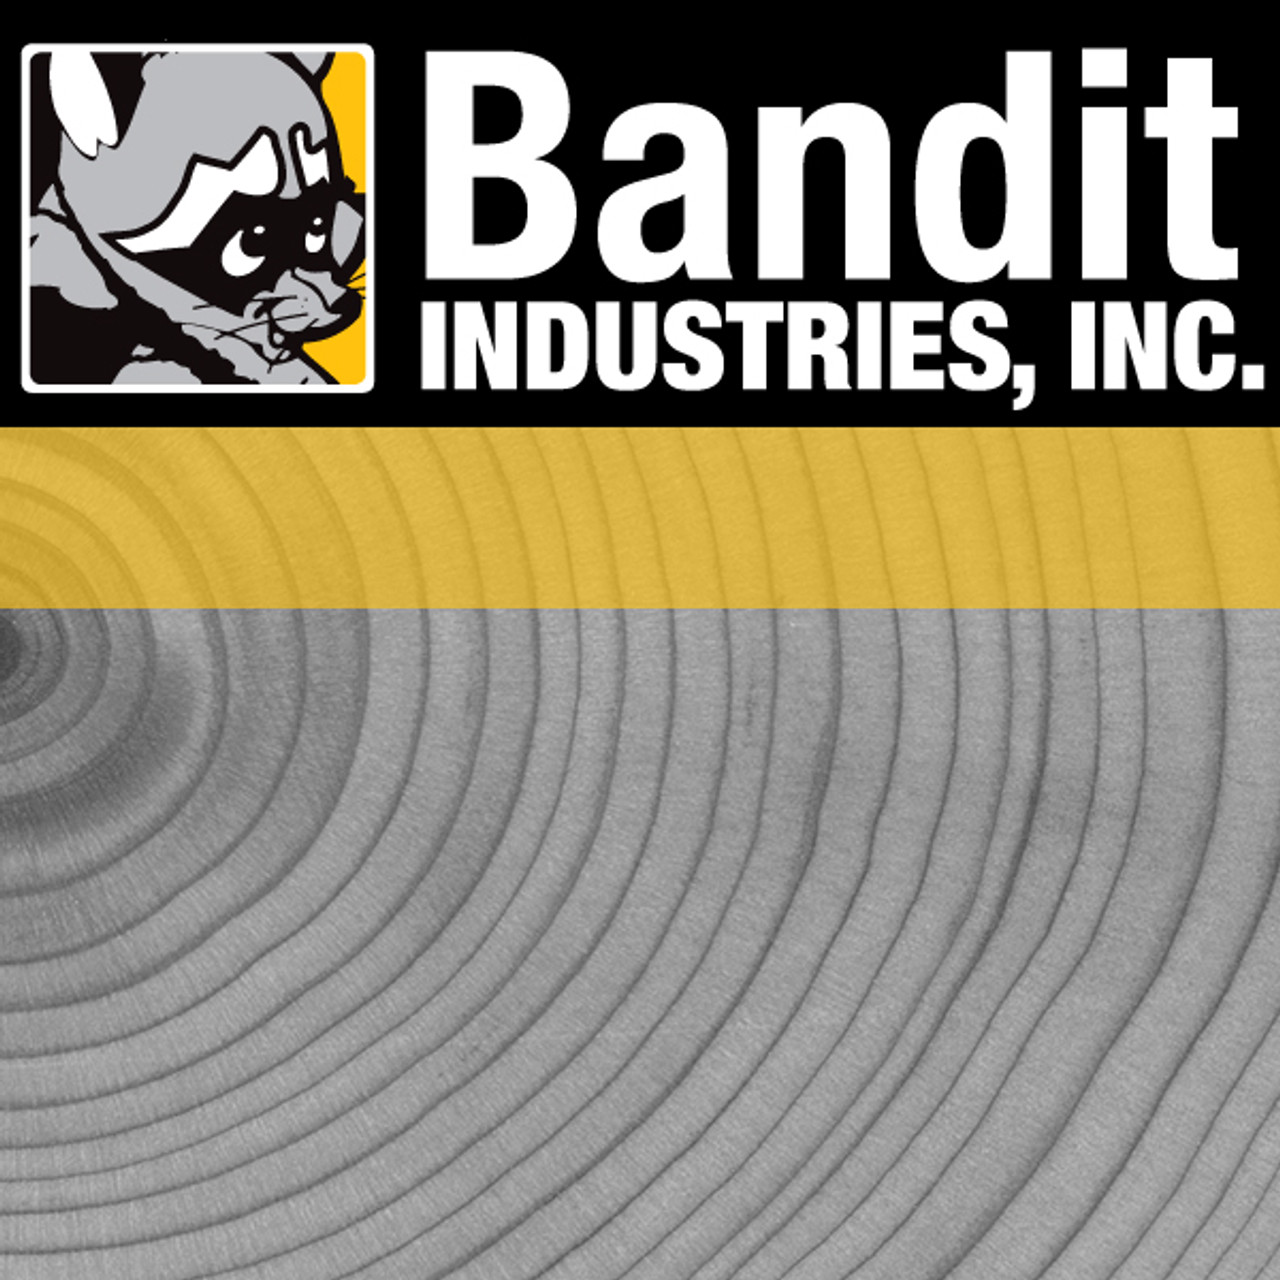 904-0007-14: BANDIT CYLINDER PIN FOR WELDED CYL. TOP AND BOTTOM 1""X2.75